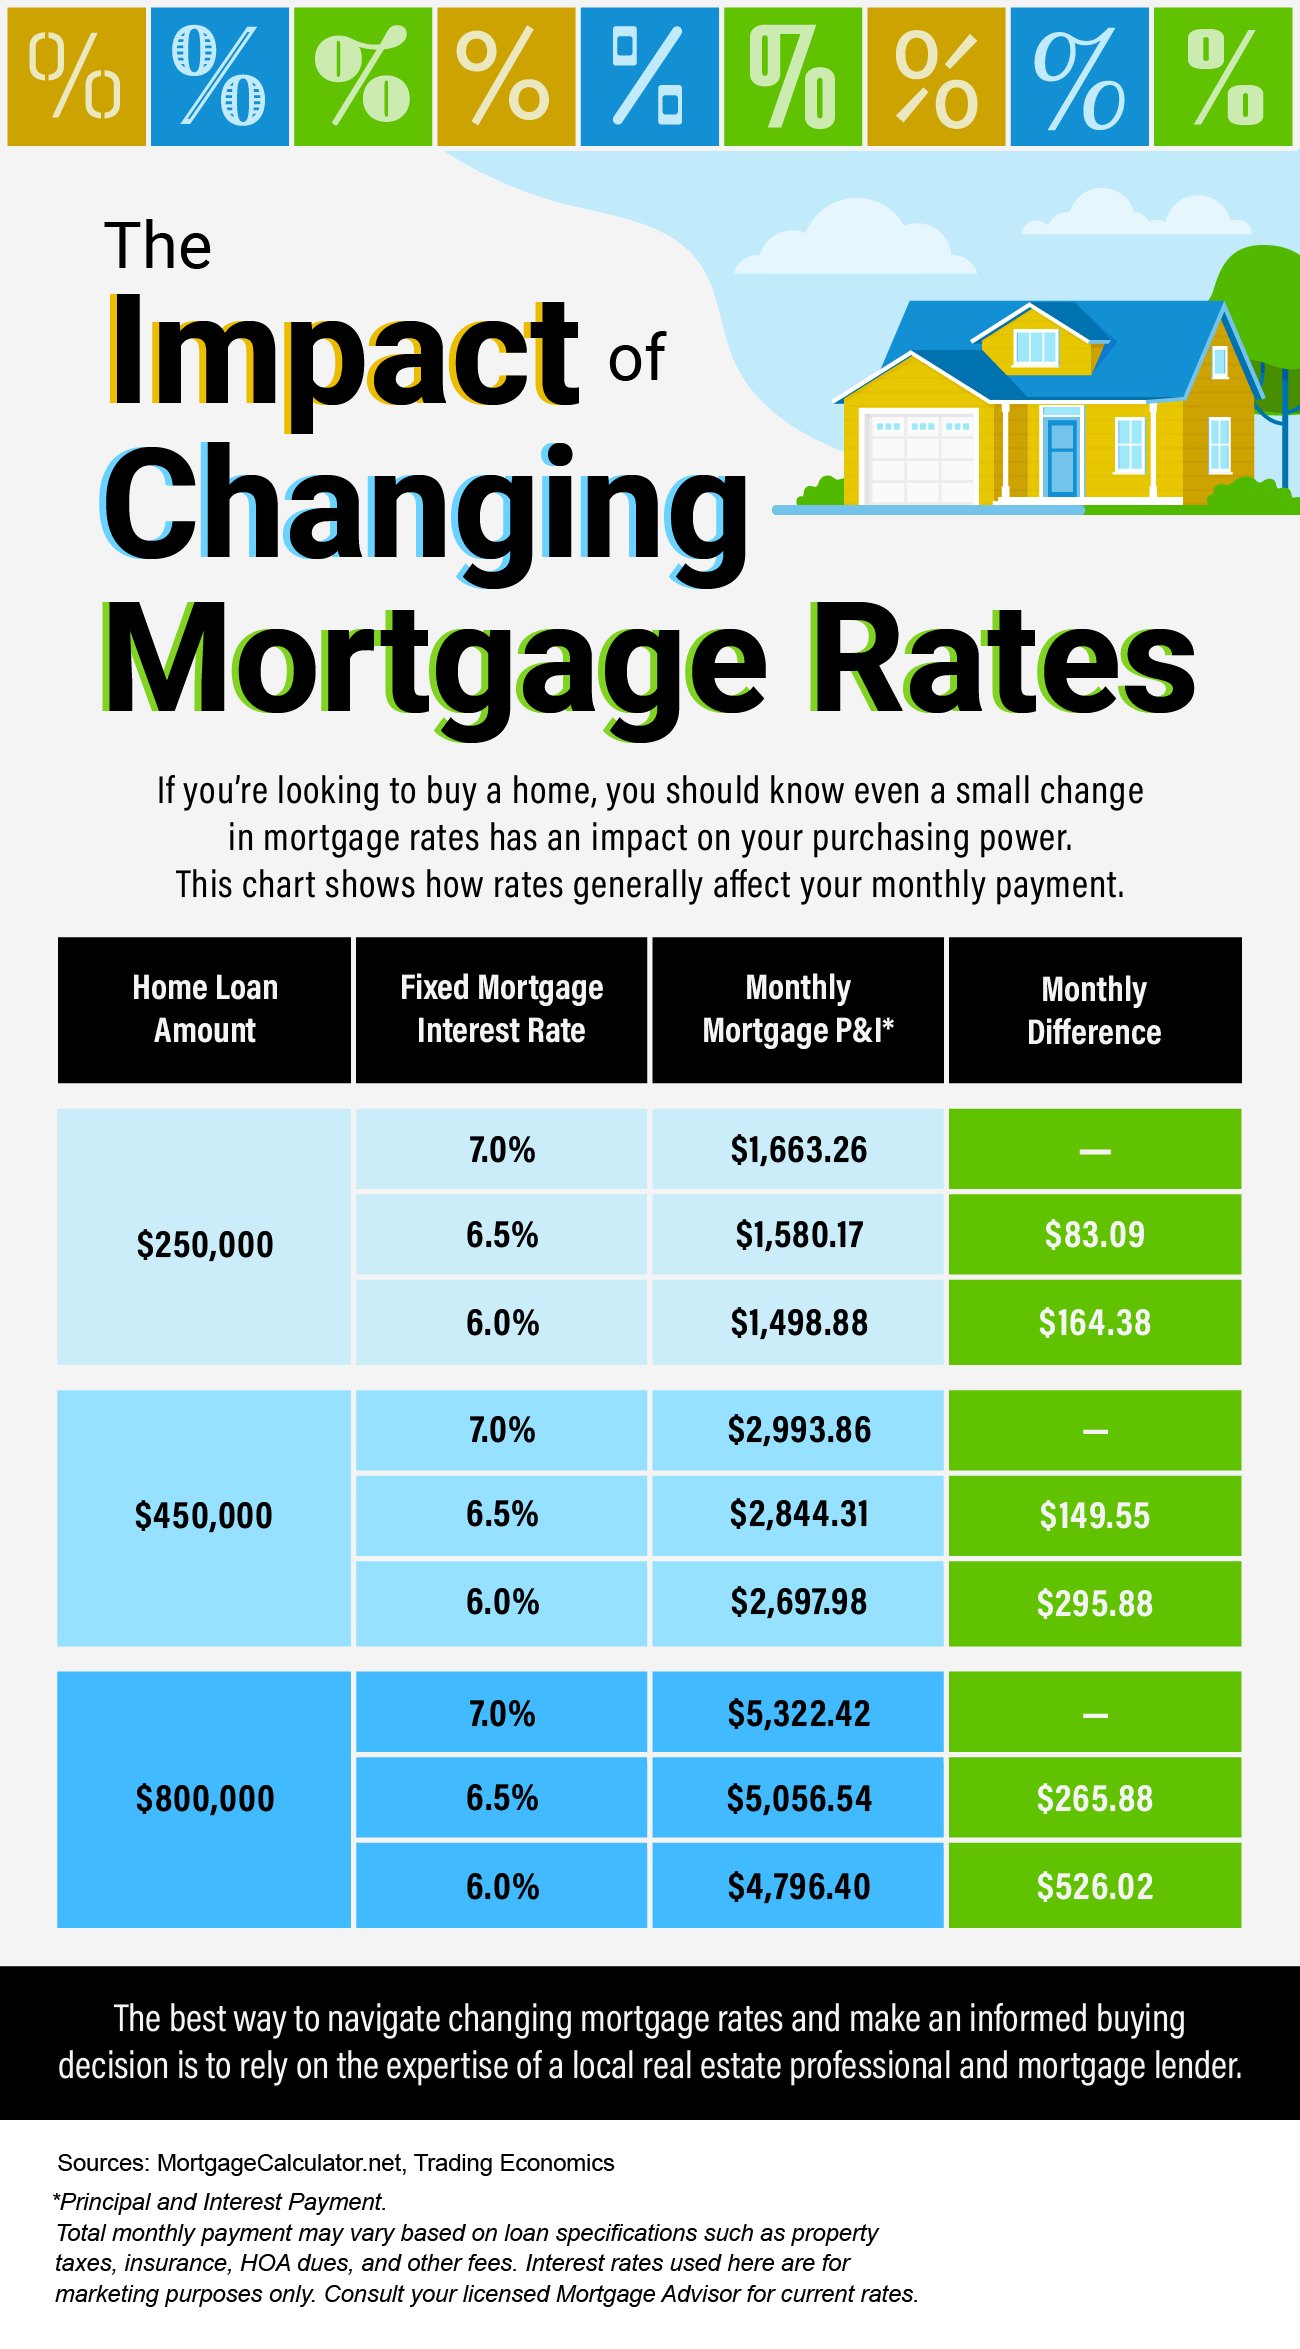 The impact of changing mortgage rates infographic